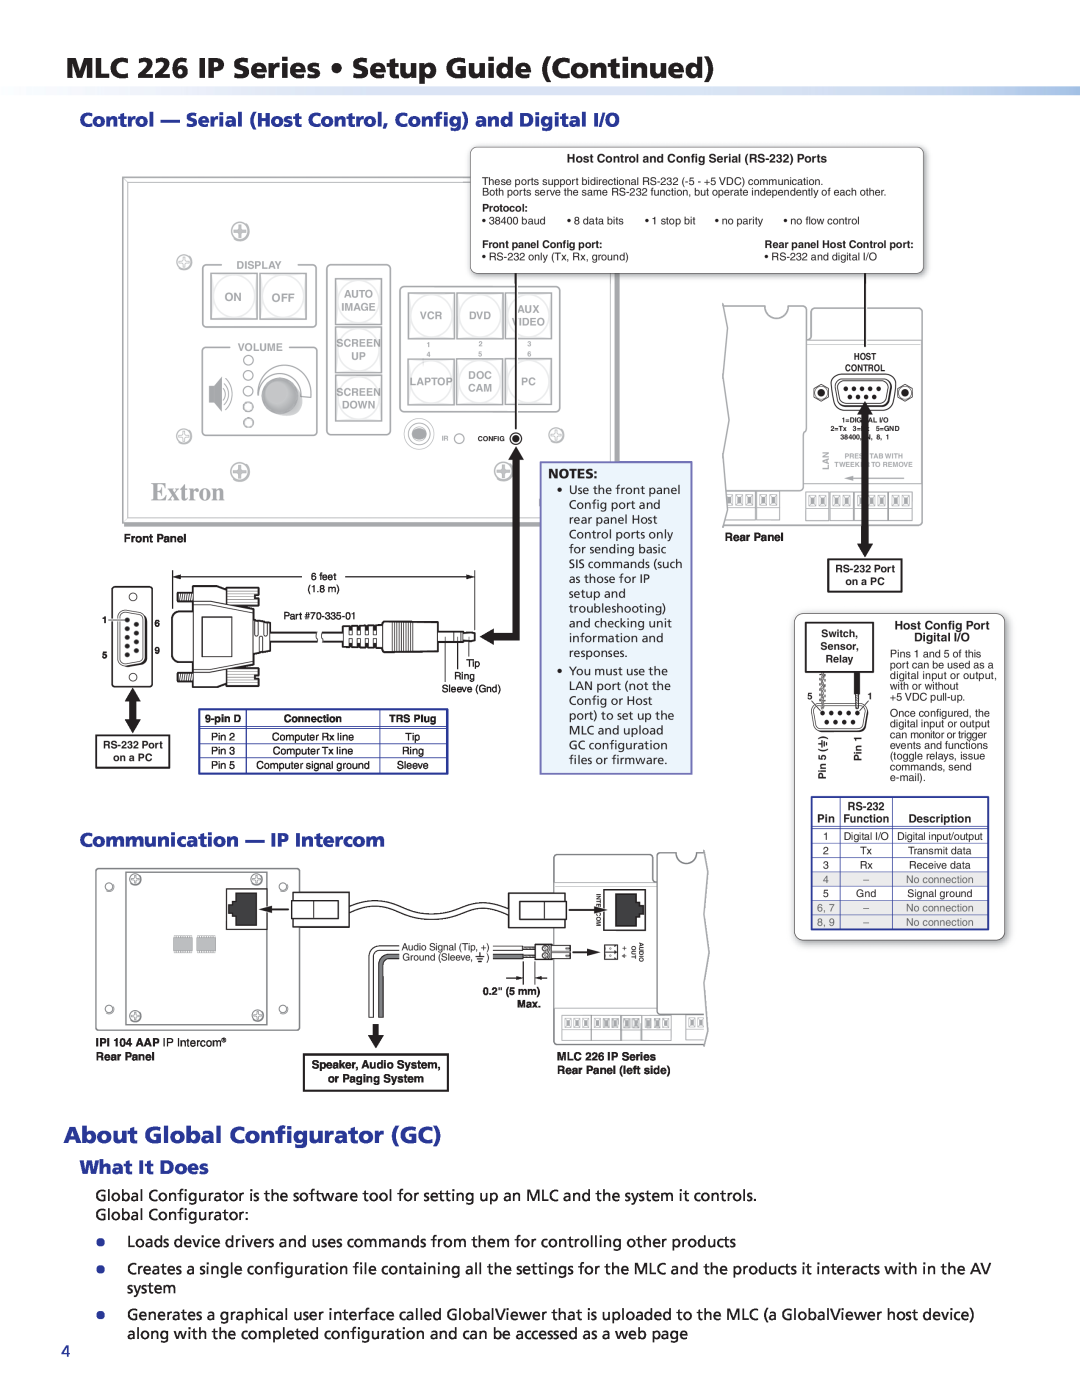 Extron electronic MLC226IP setup guide About Global Configurator GC, Control - Serial Host Control, Config and Digital I/O 